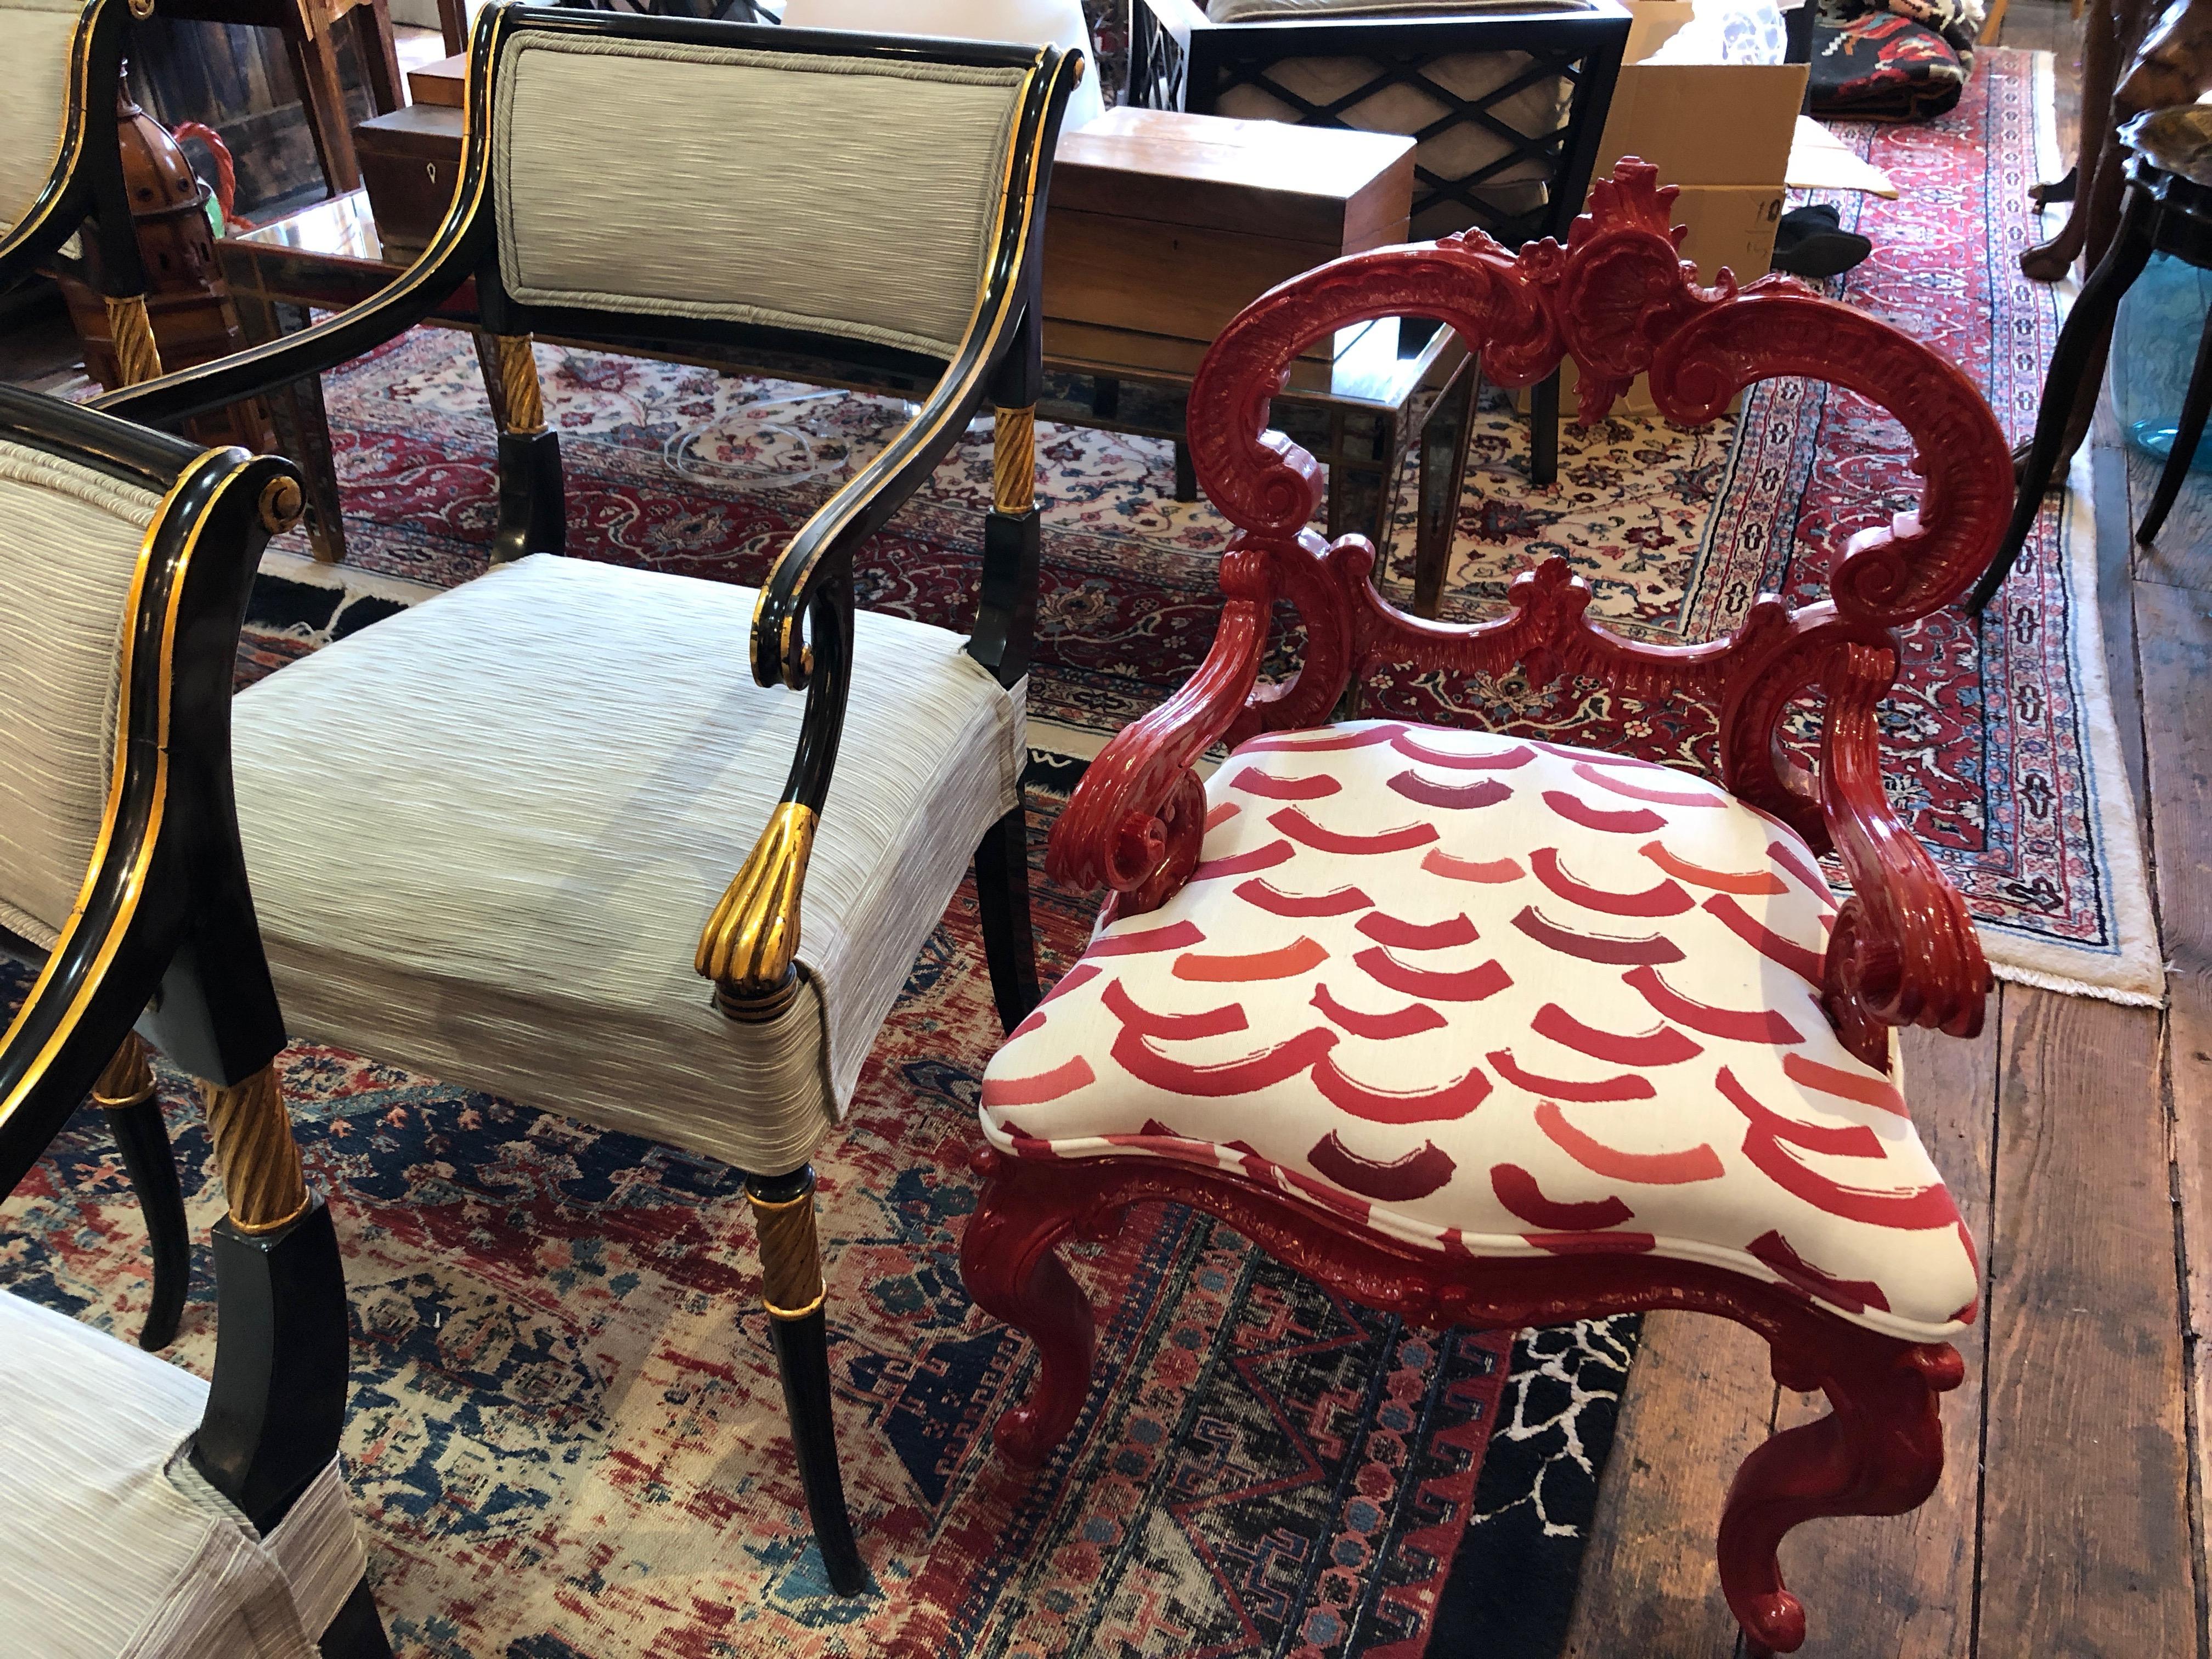 High design in a small package is how we describe this super chic designer small chair having a cherry red shiny laquer Rococo frame and new contemporary graphic upholstery on the seat. Measures: Seat height 16, seat depth 16.5.